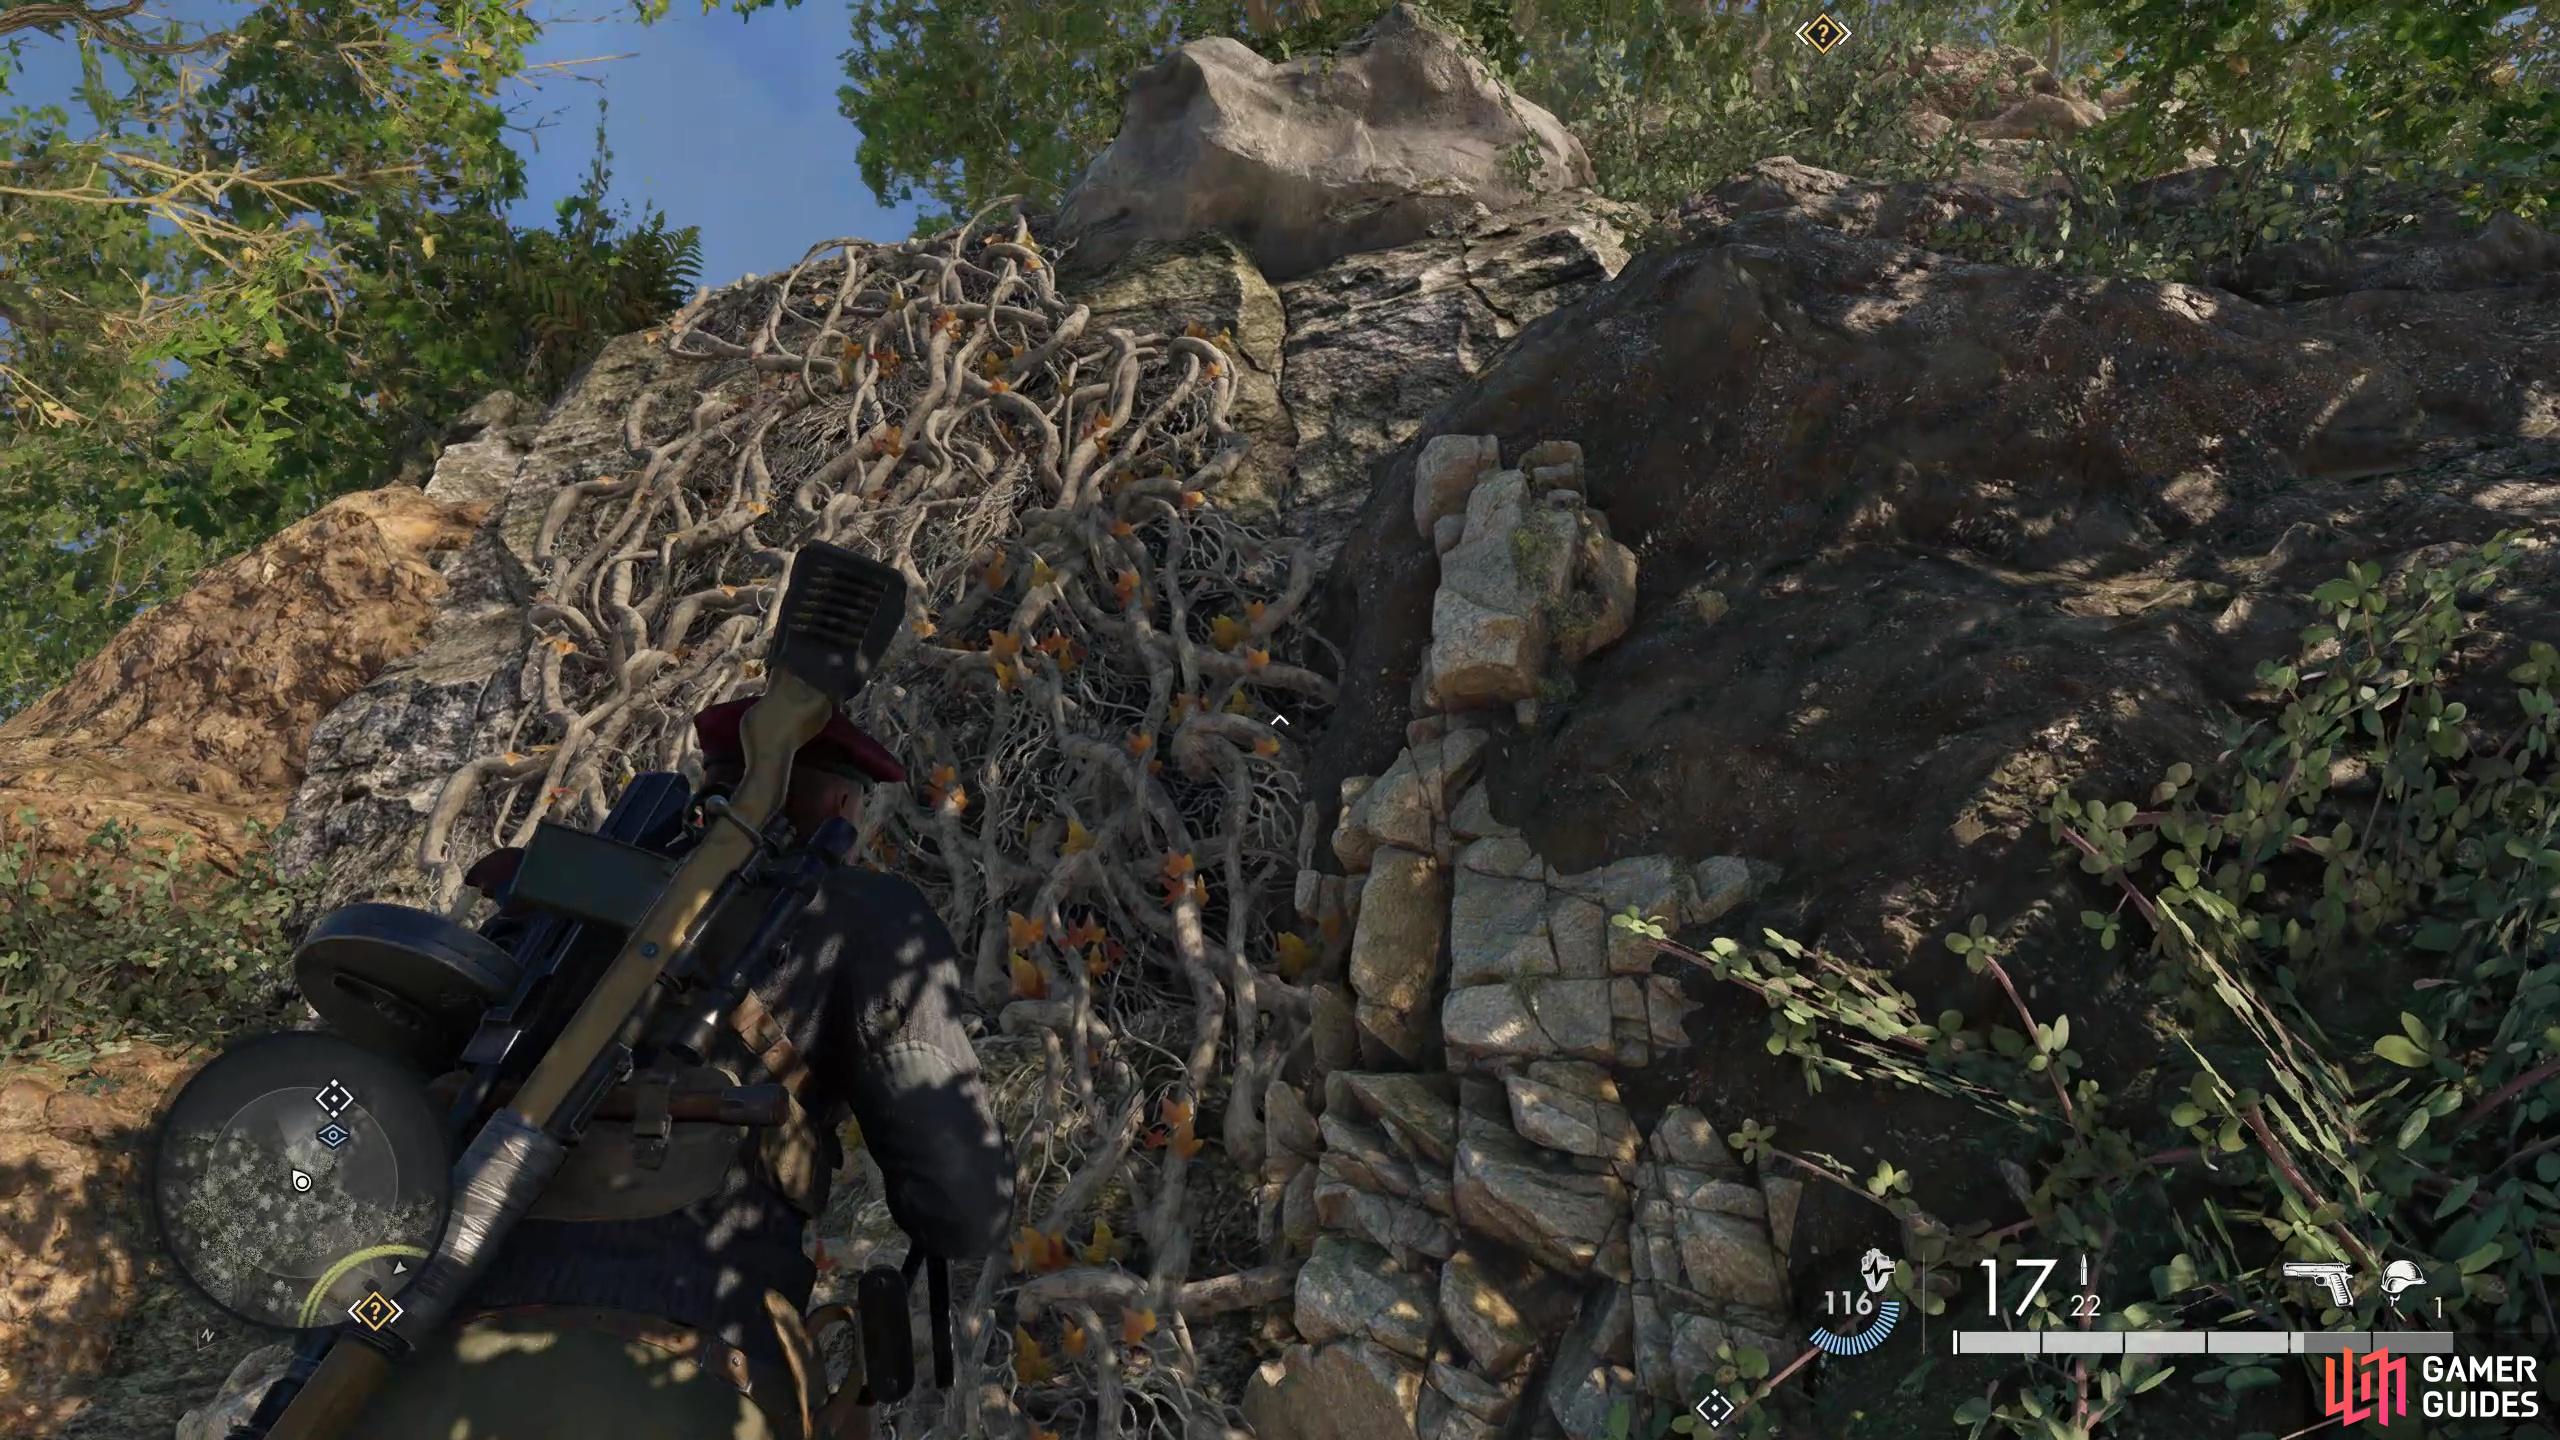 To access the resistance camp you will need to travel past the waterfall and climb these vines.